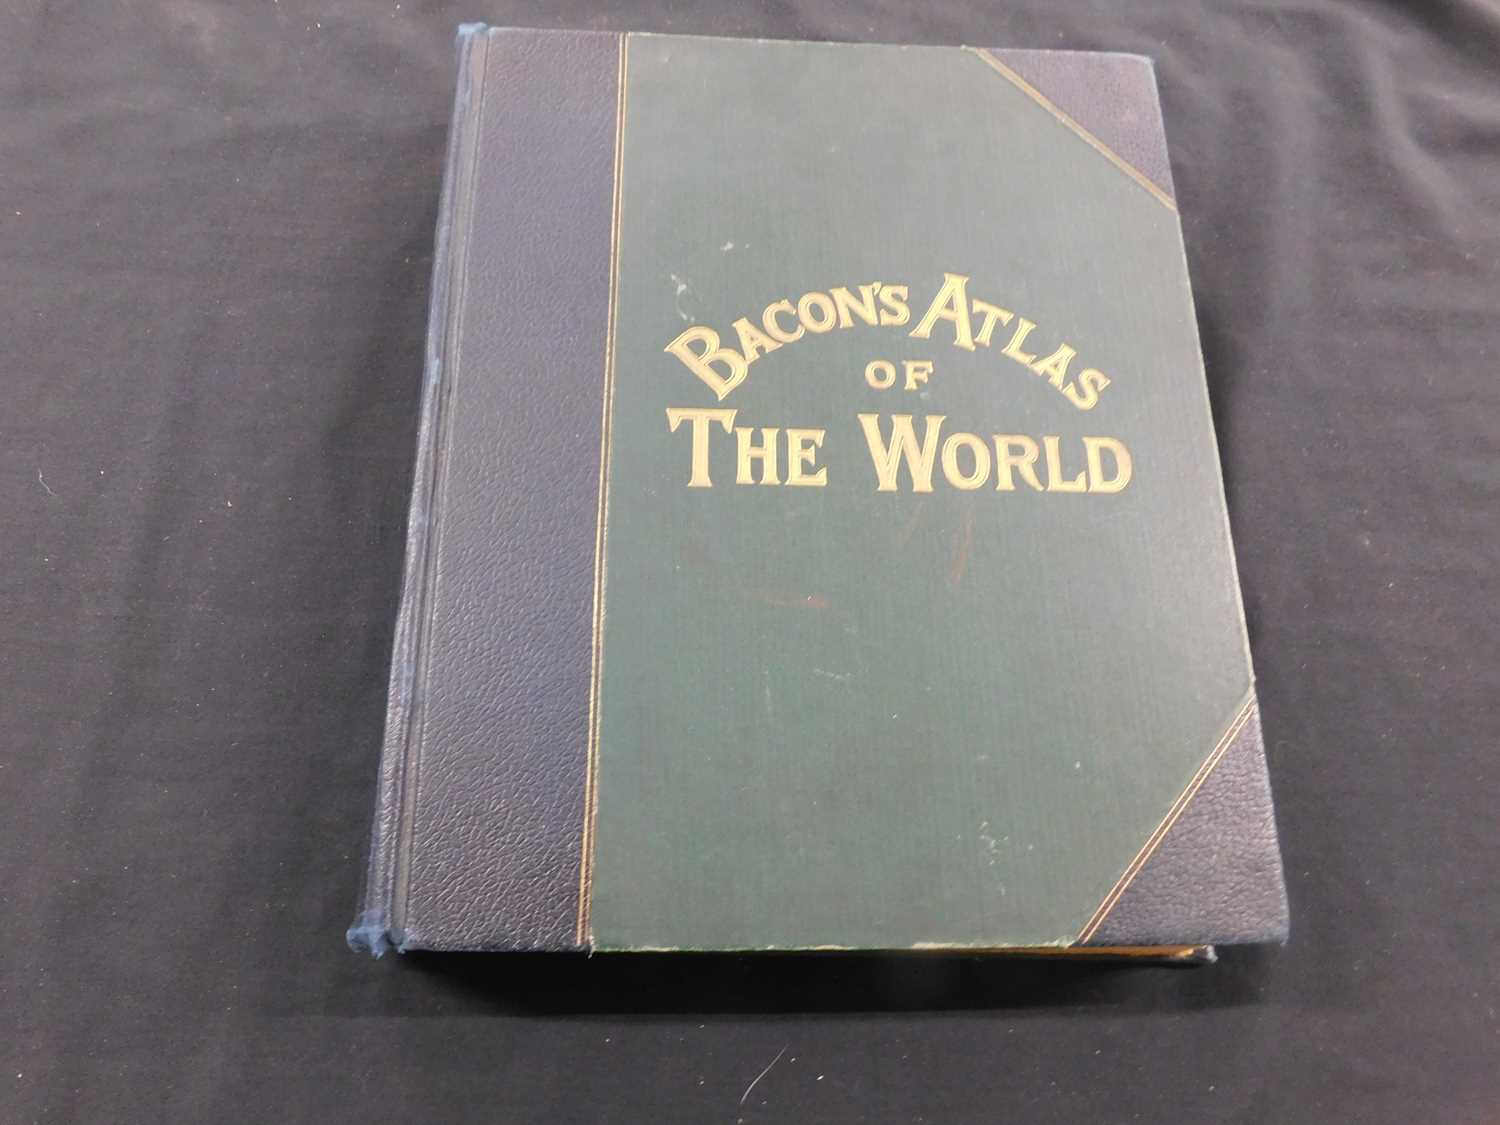 COMMERCIAL AND LIBRARY ATLAS OF THE WORLD WITH INDEX, Ed G W Bacon, London, G W Bacon, 1909, maps